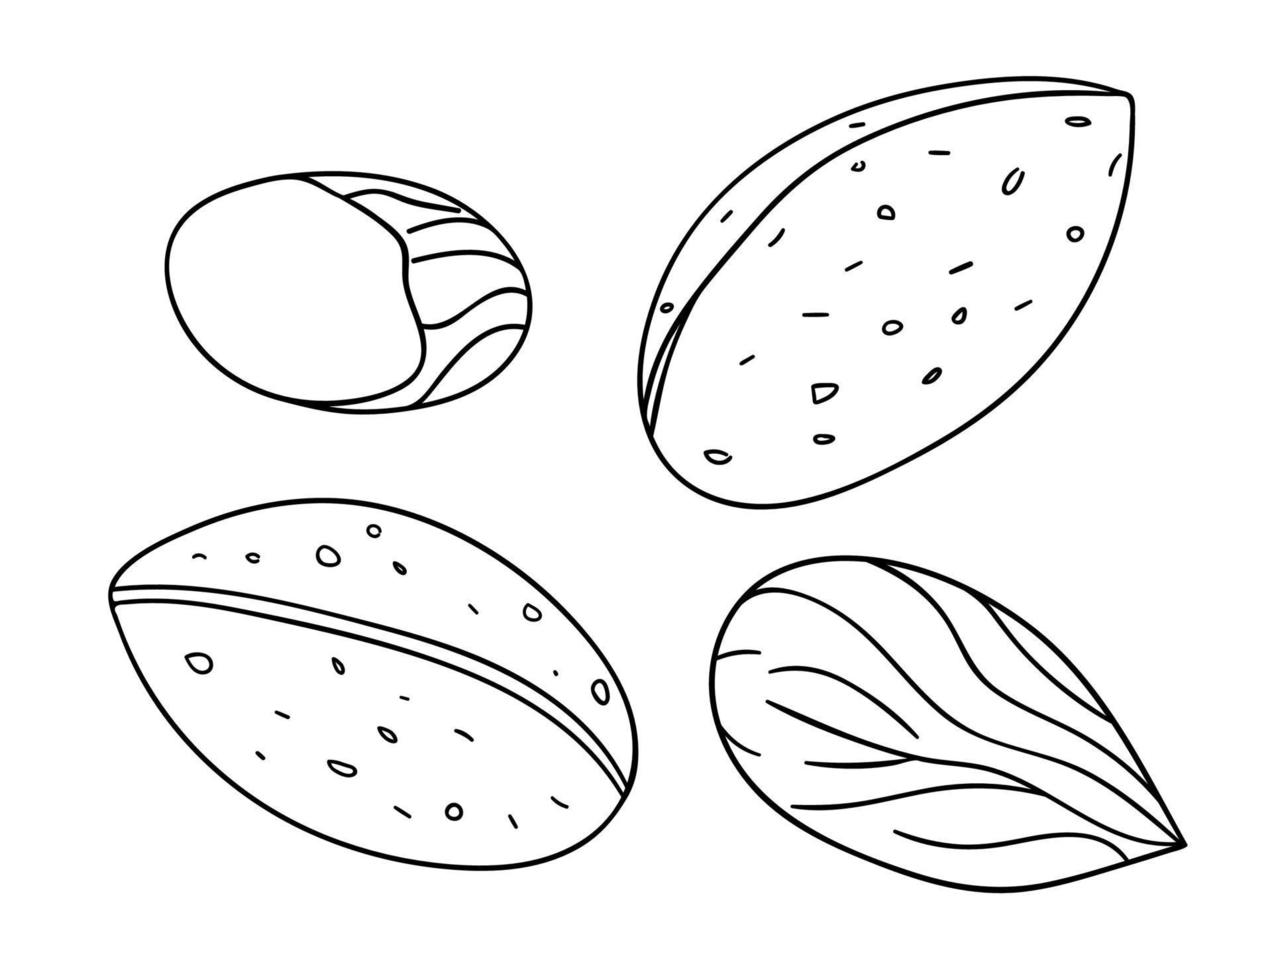 Vector black and white almond icon. Set of isolated monochrome nuts. Food line drawing illustration in cartoon or doodle style isolated on white background.